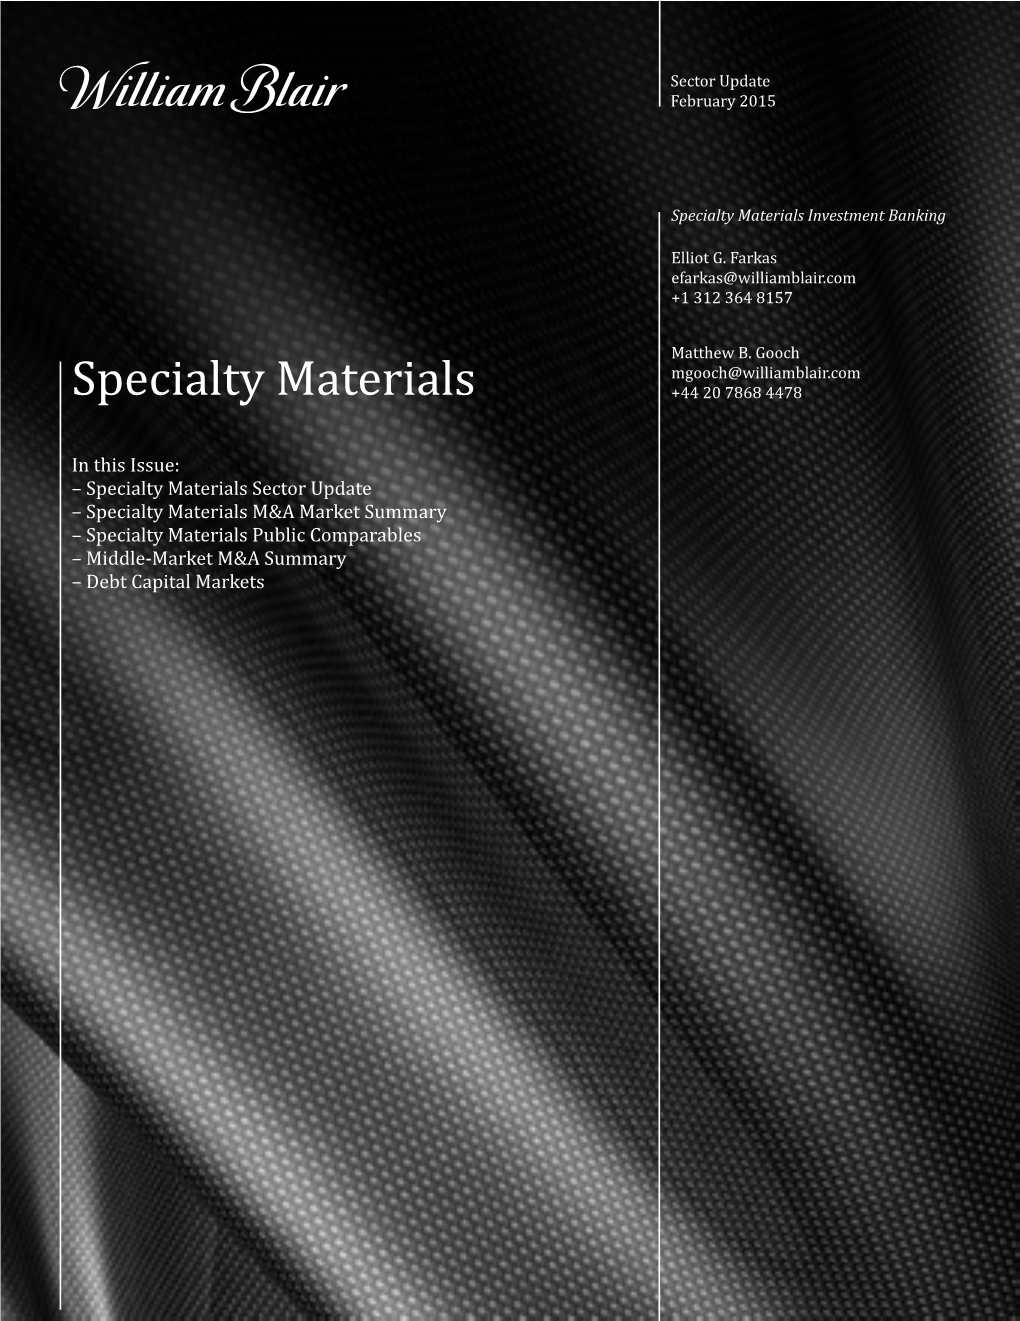 Specialty Materials Investment Banking